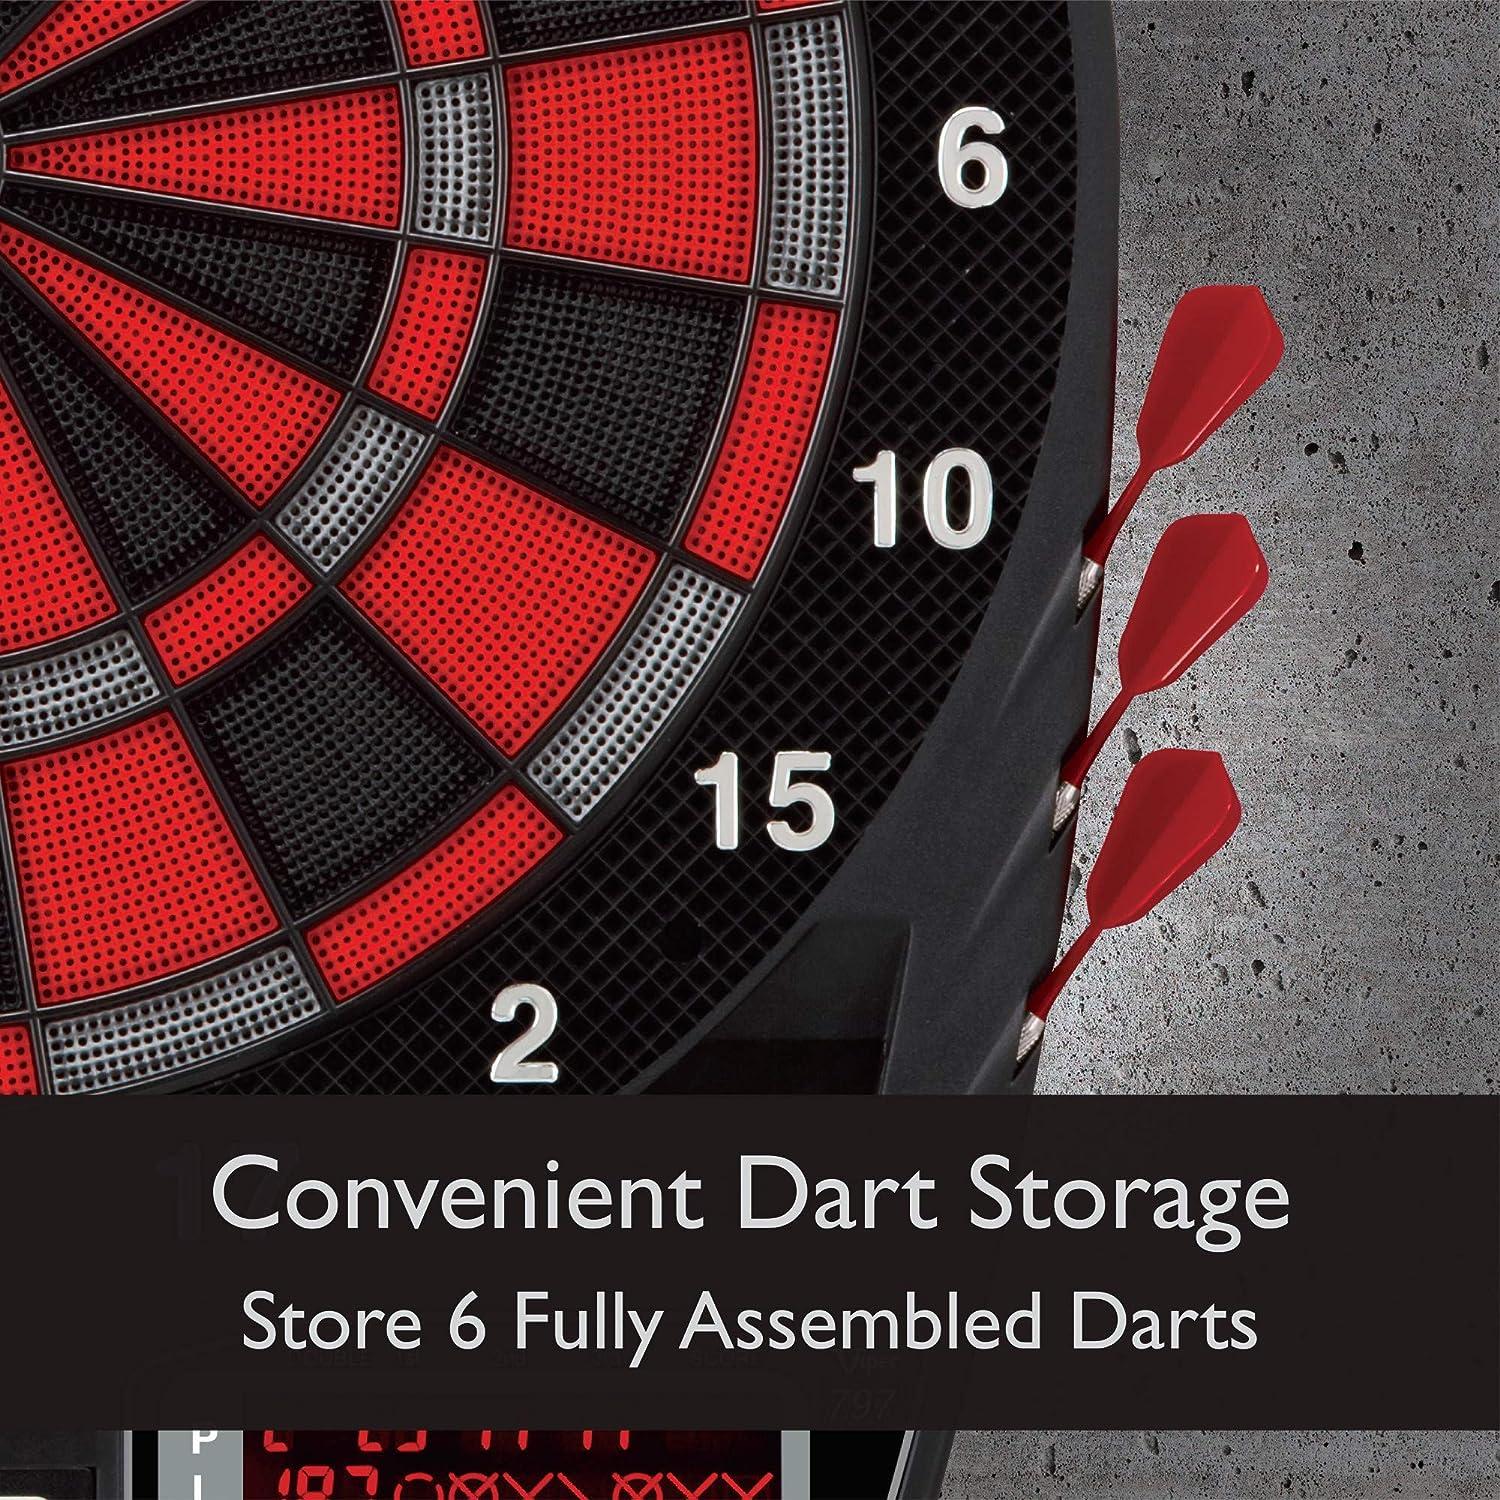 Viper 797 Electronic Dartboard, Quick Access To 301 And Countup